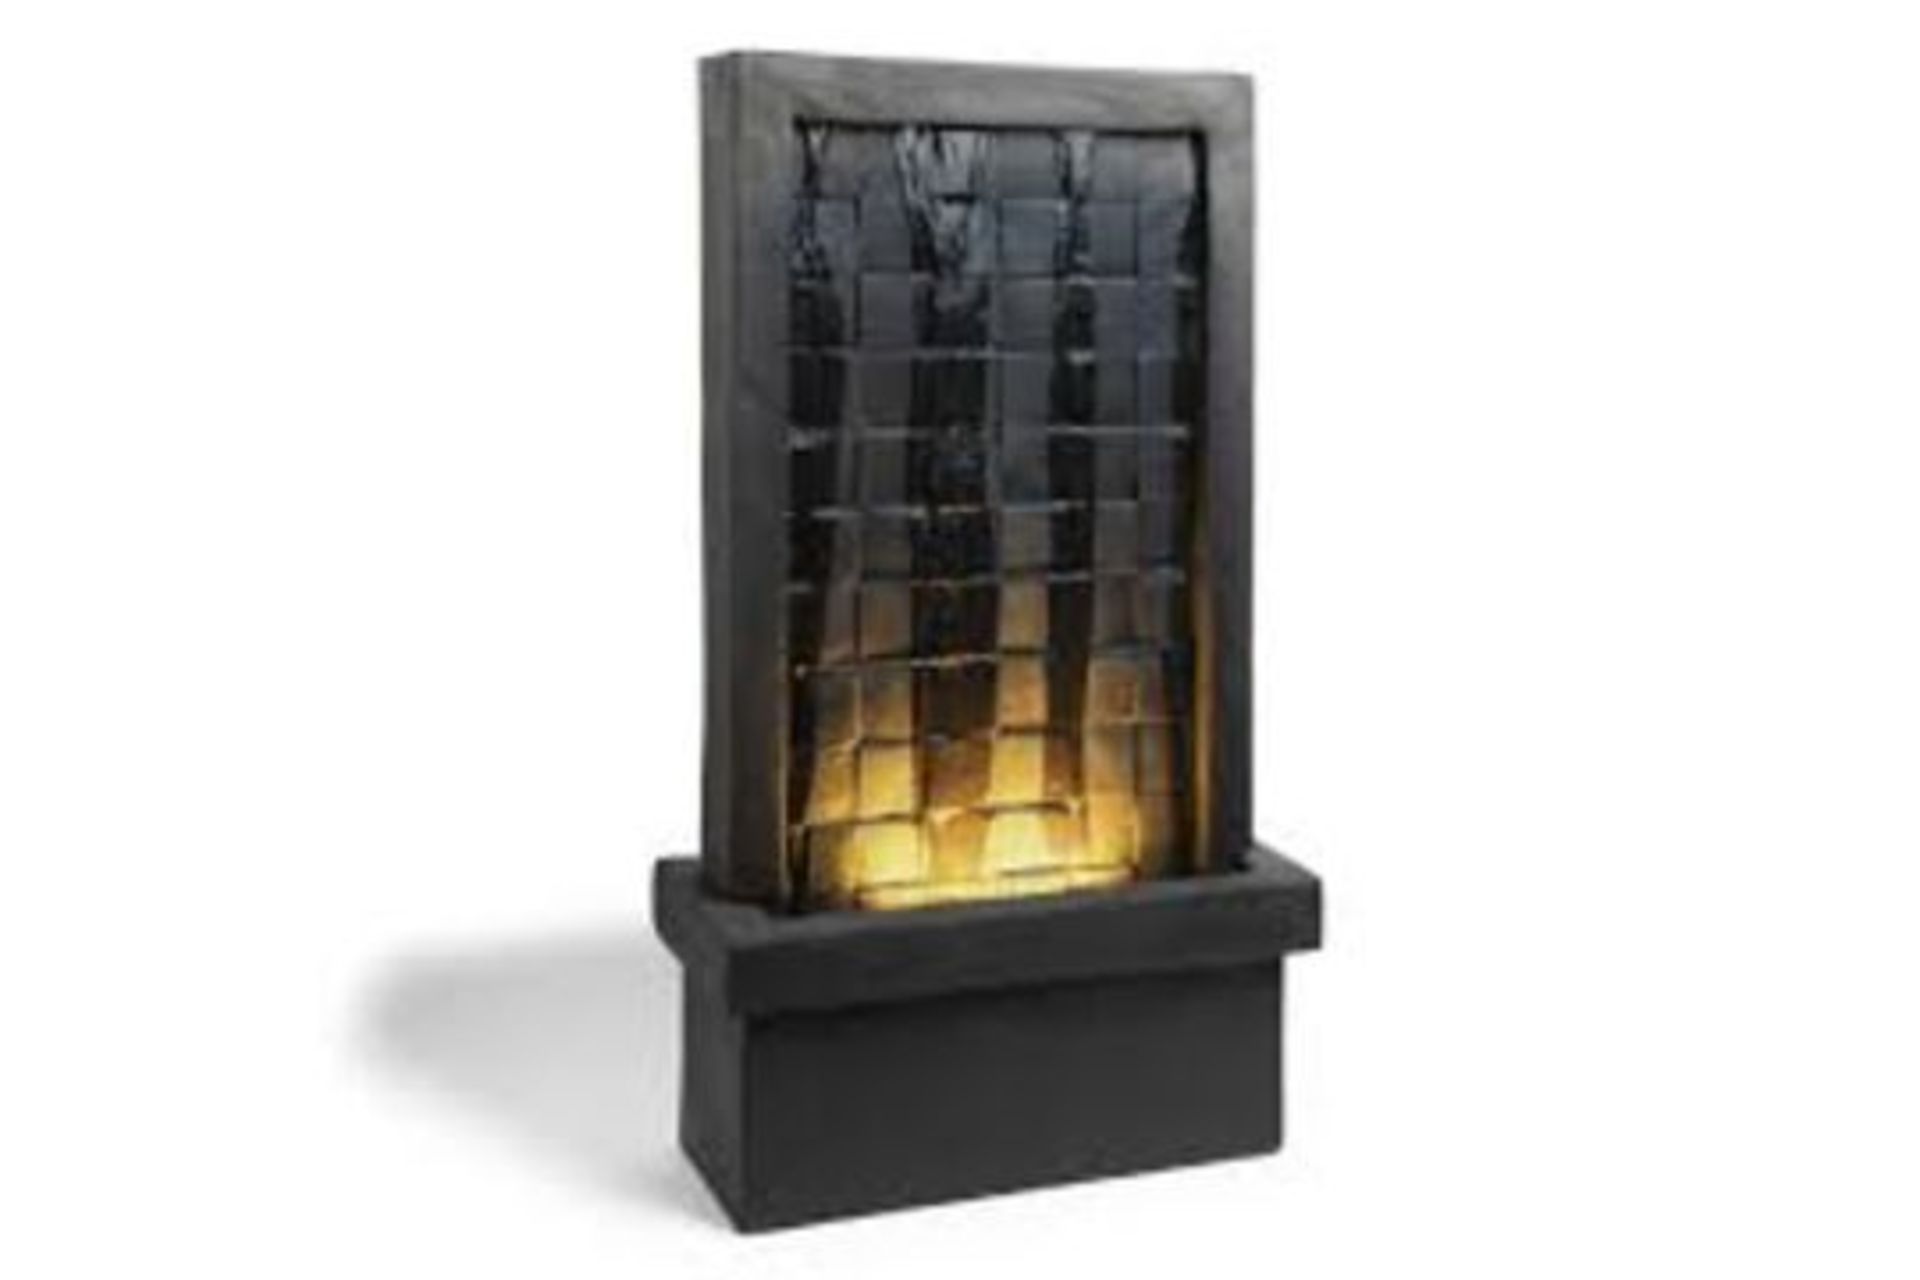 New & Boxed Tiled Waterfall Water Feature - Tall LED Wall Lit Cascading Water Fountain. RRP £349.99. - Image 2 of 2